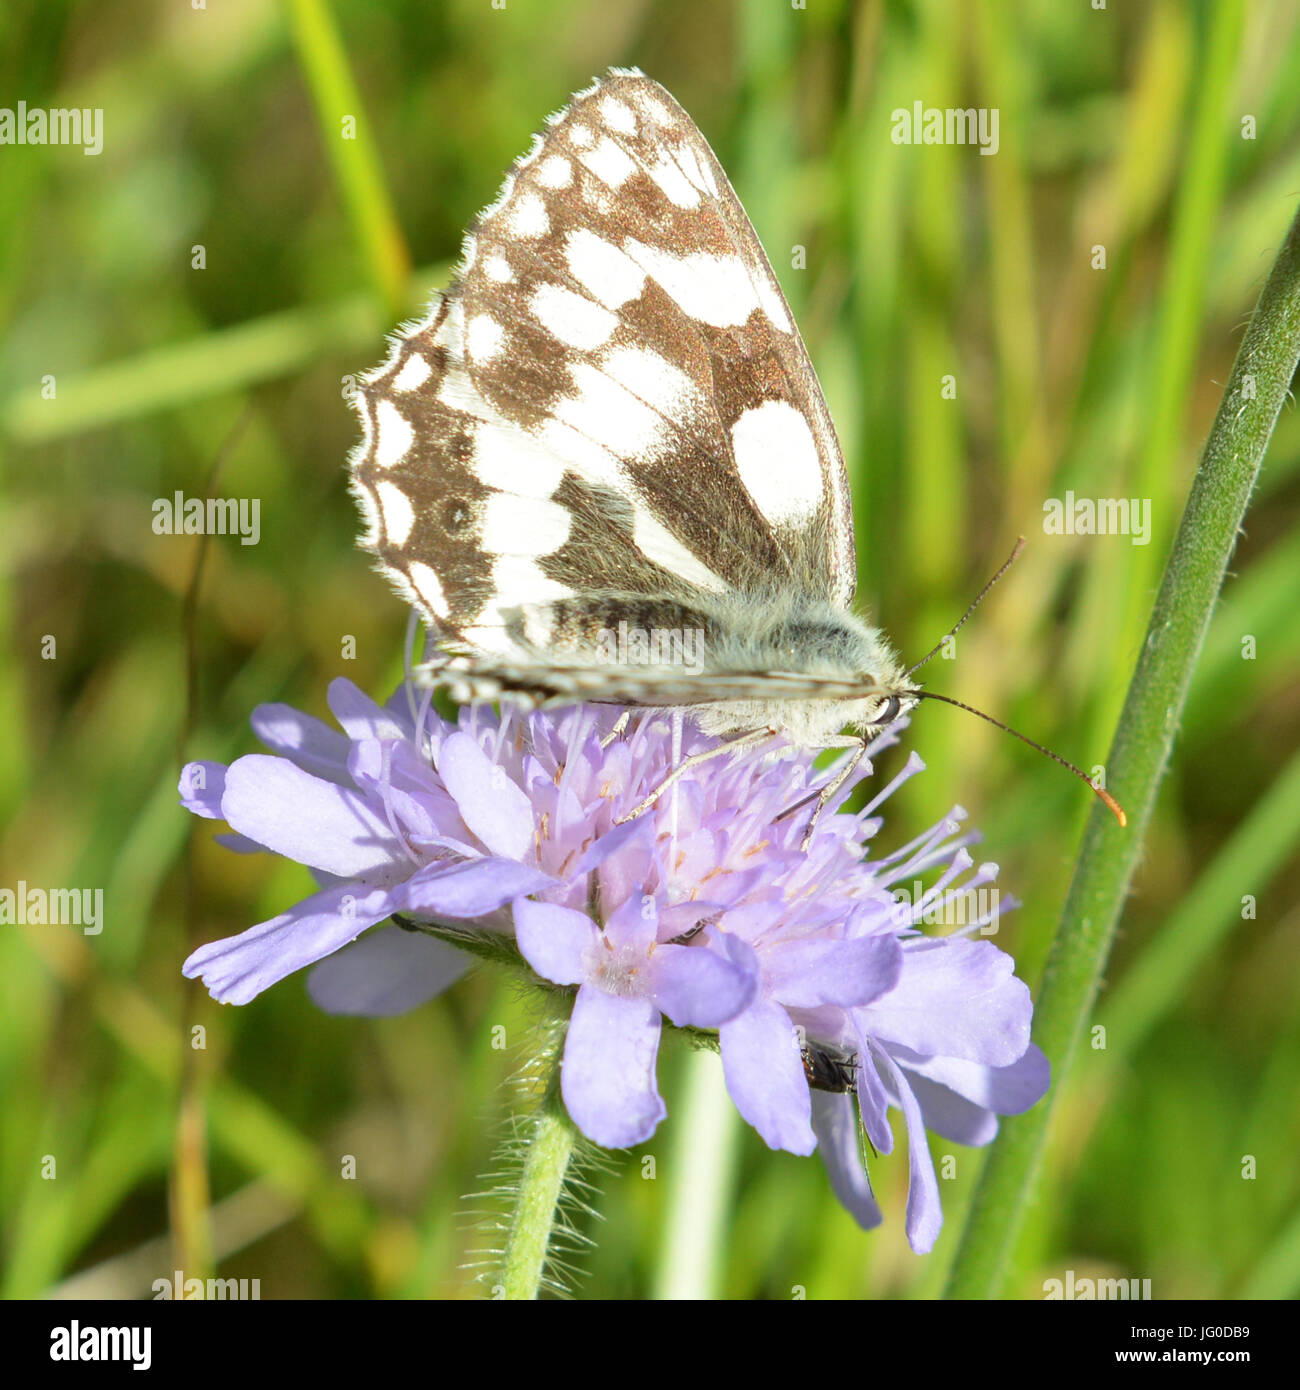 Reigate, UK. 03rd July, 2017. UK Weather: Butterflies on Colley Hill, Surrey. A Melanargia galathea Marbled White Butterfly feeds on Field Scabious flowers in a meadow on the slopes of the North Downs at Colley Hill, Surrey. Monday 3rd July 2017. Photo: Credit: Lindsay Constable/Alamy Live News Stock Photo